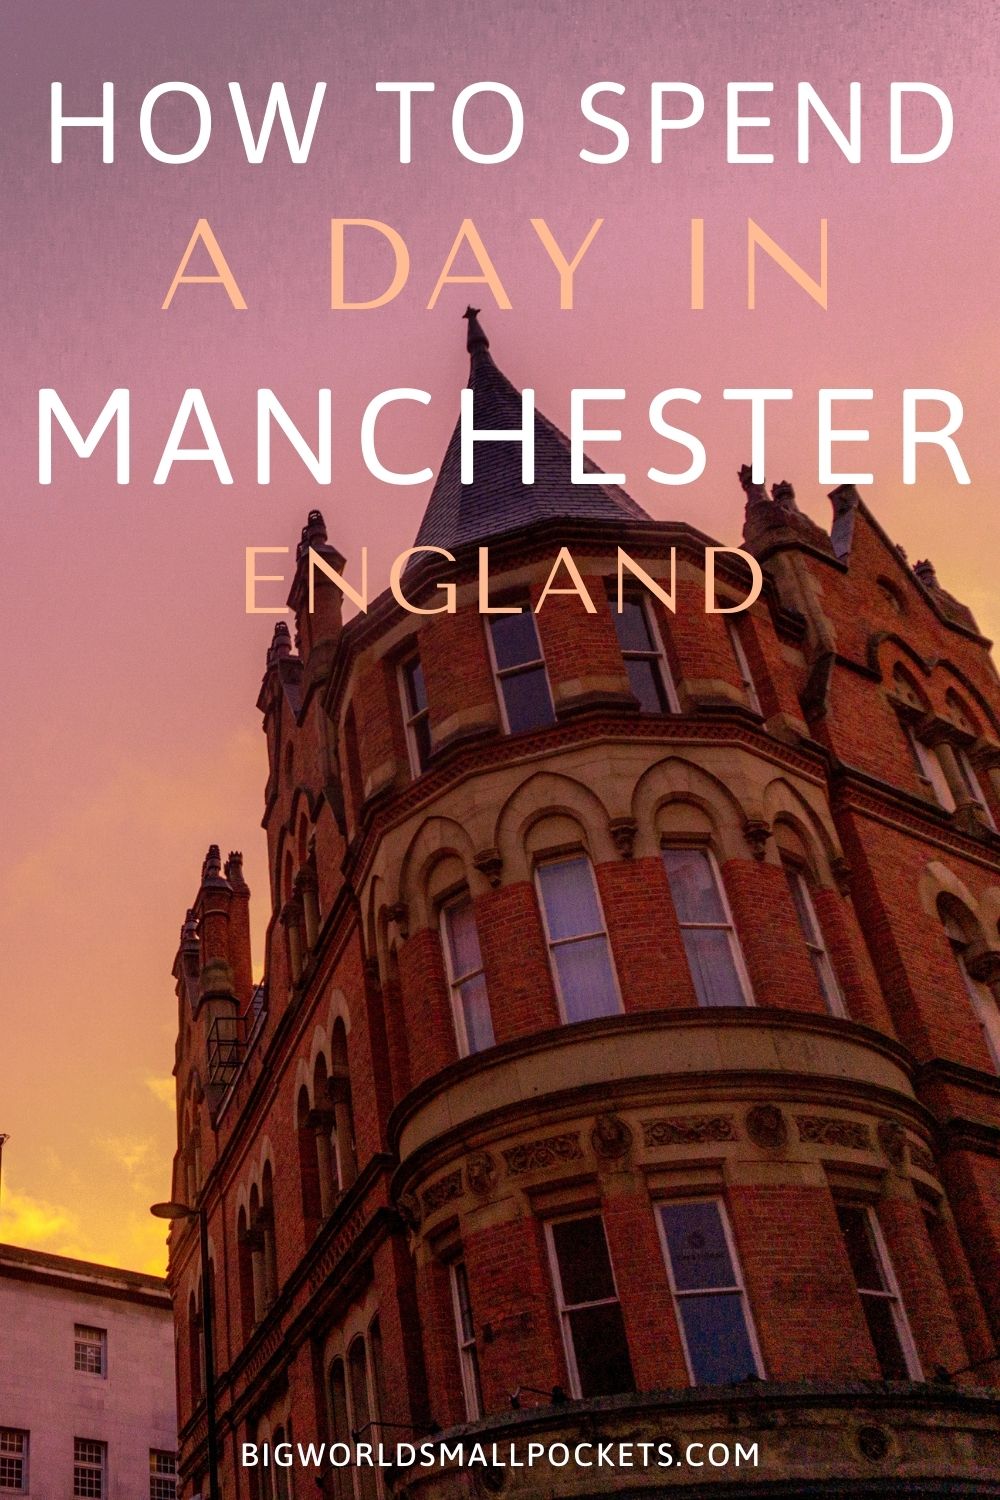 How to Spend a Day in Manchester, England